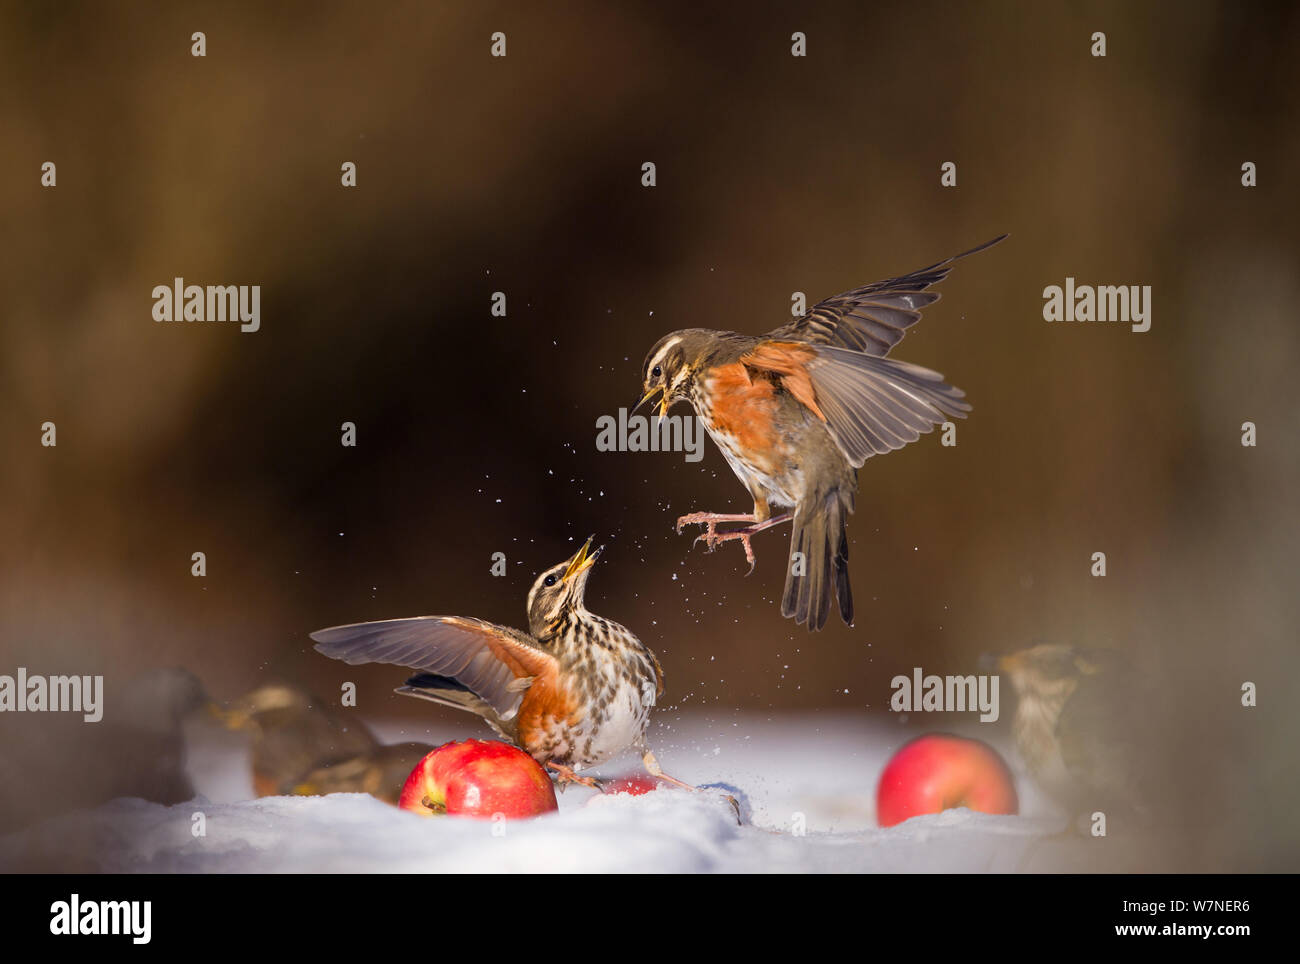 Redwings (Turdus iliacus) squabbling over an apple in snow. Derbyshire, UK, February. British Wildlife Photographer of the Year (BWPA) competition 2012, 'Animal Behaviour' category. (Non-ex) Stock Photo